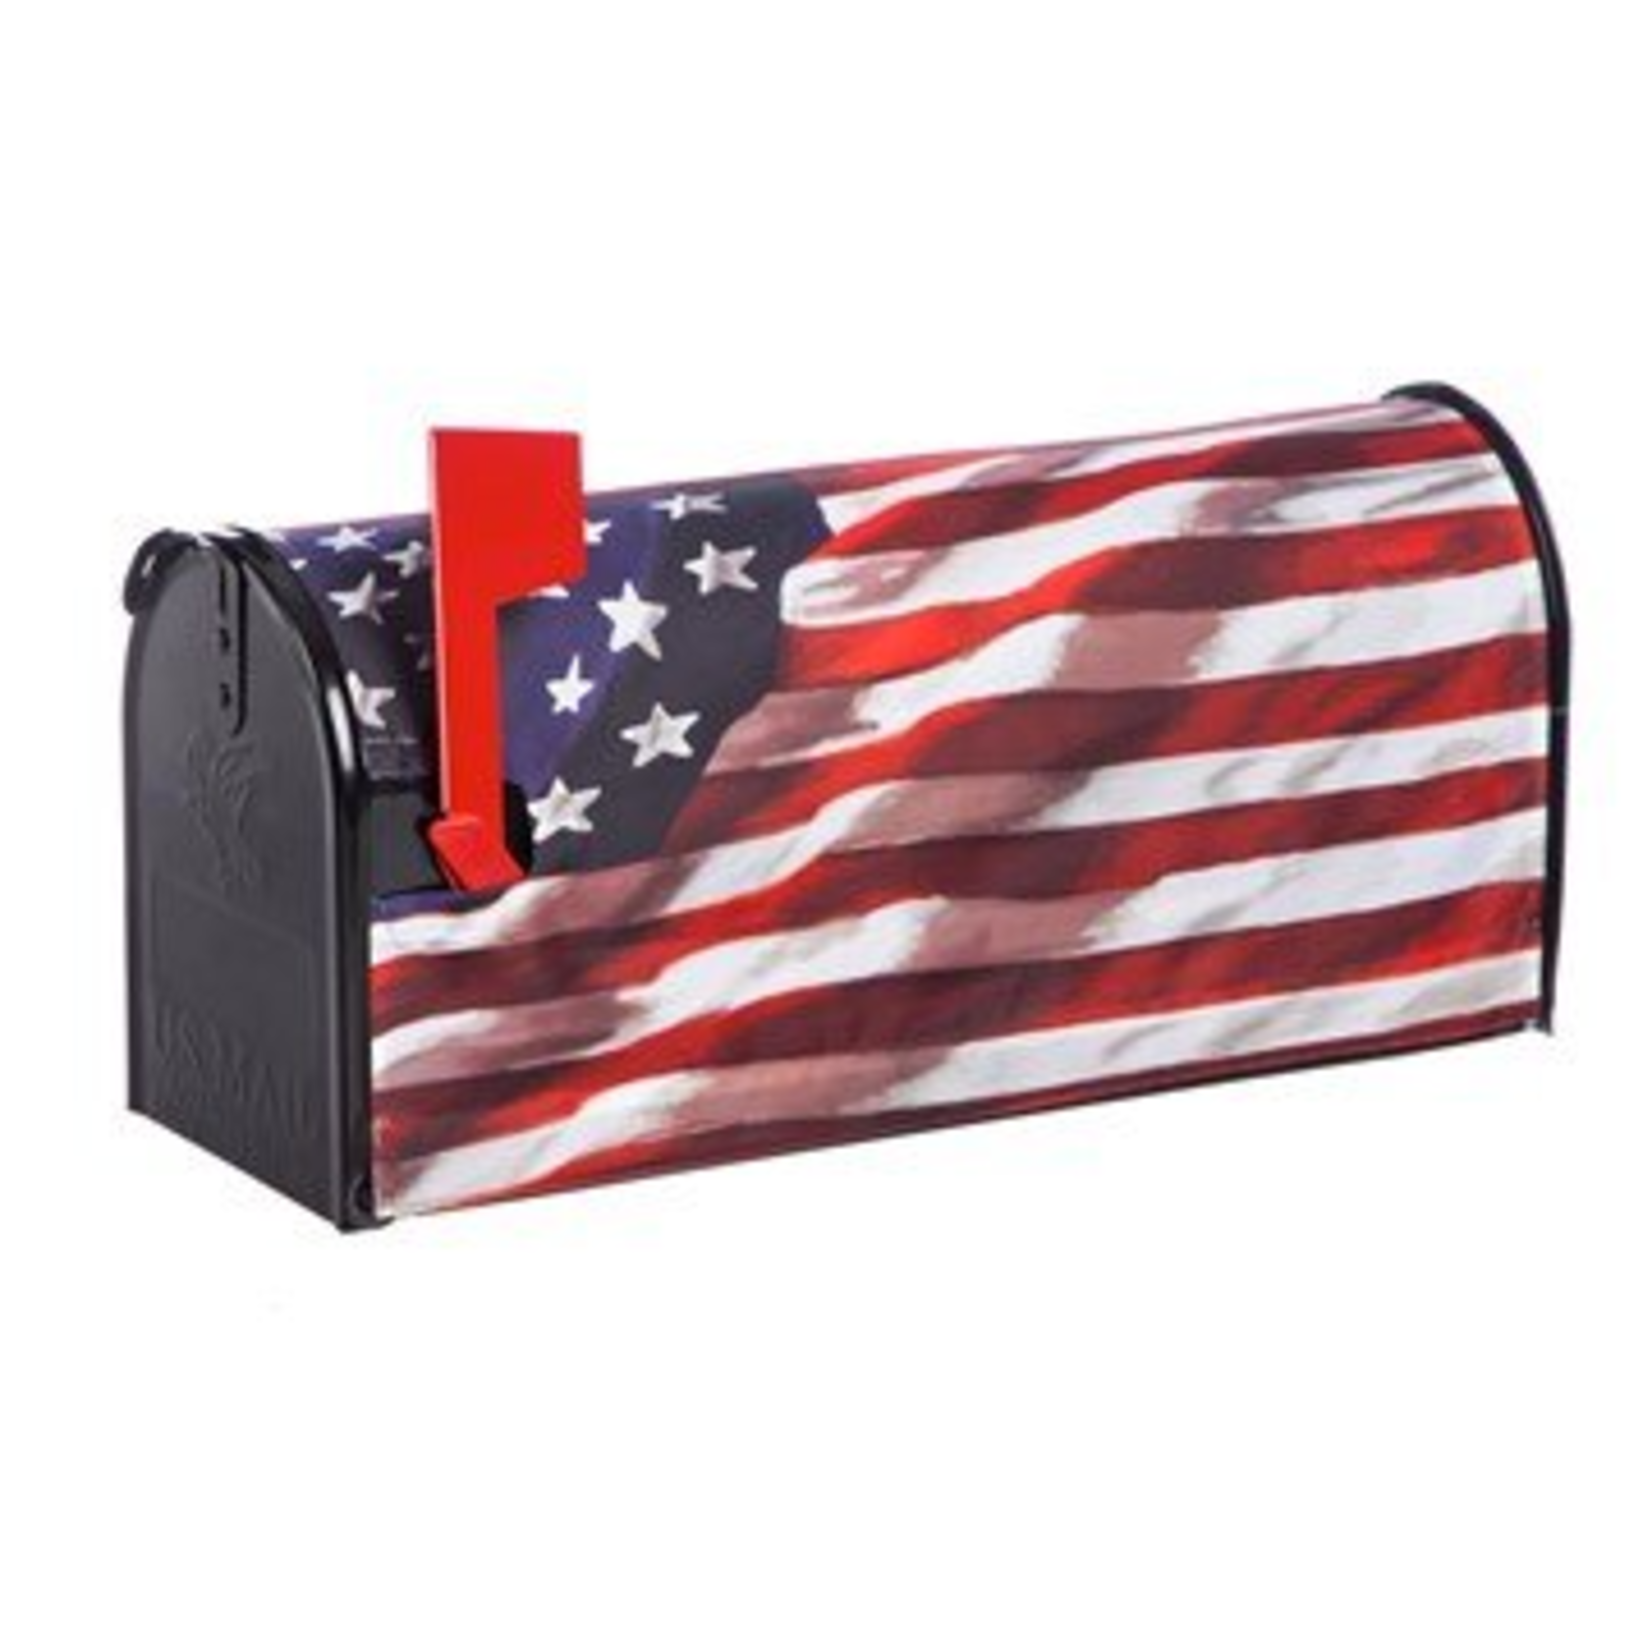 Evergreen America In Motion Mailbox Cover